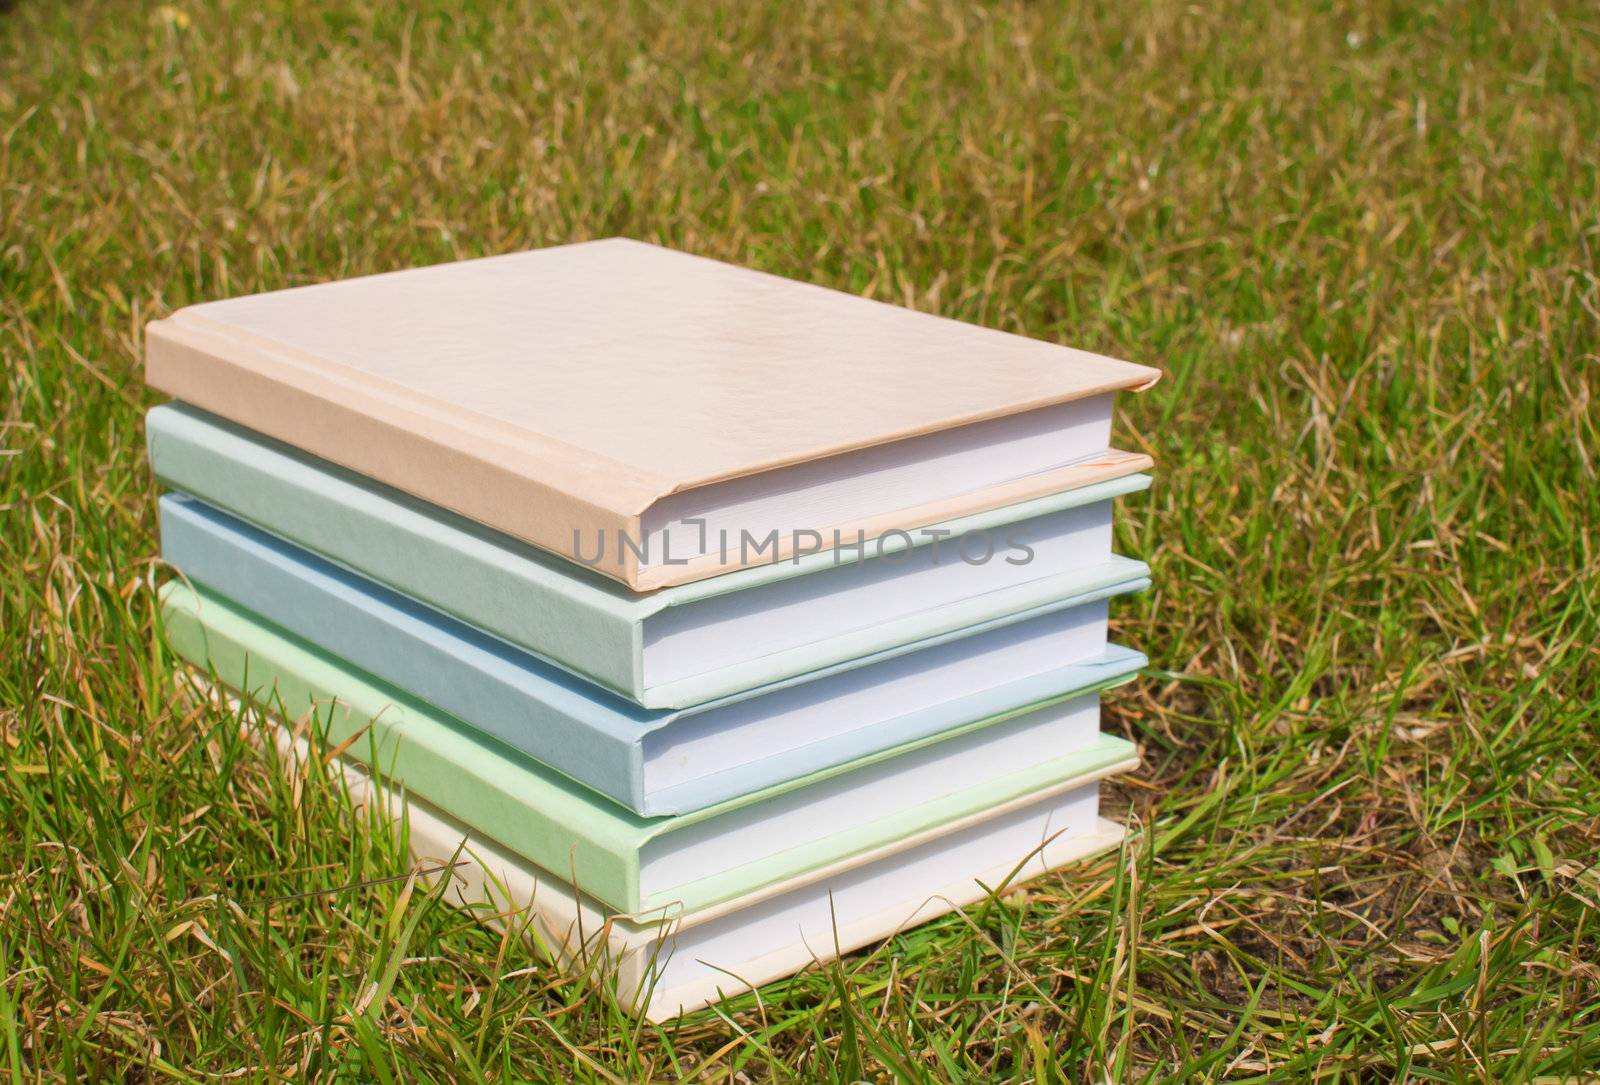 Stack of the books laying at the grass